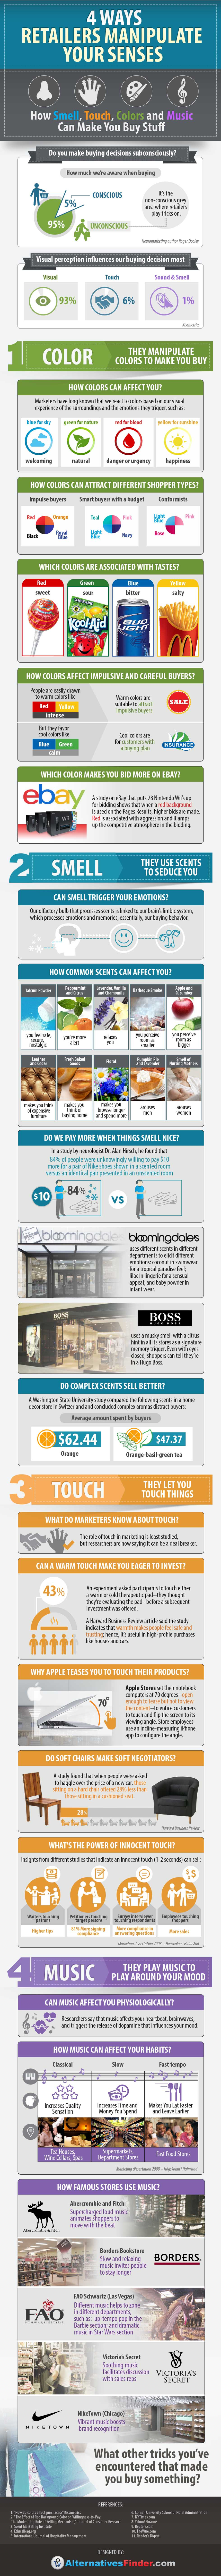 4 Ways Retailers Manipulate your Senses_infographic